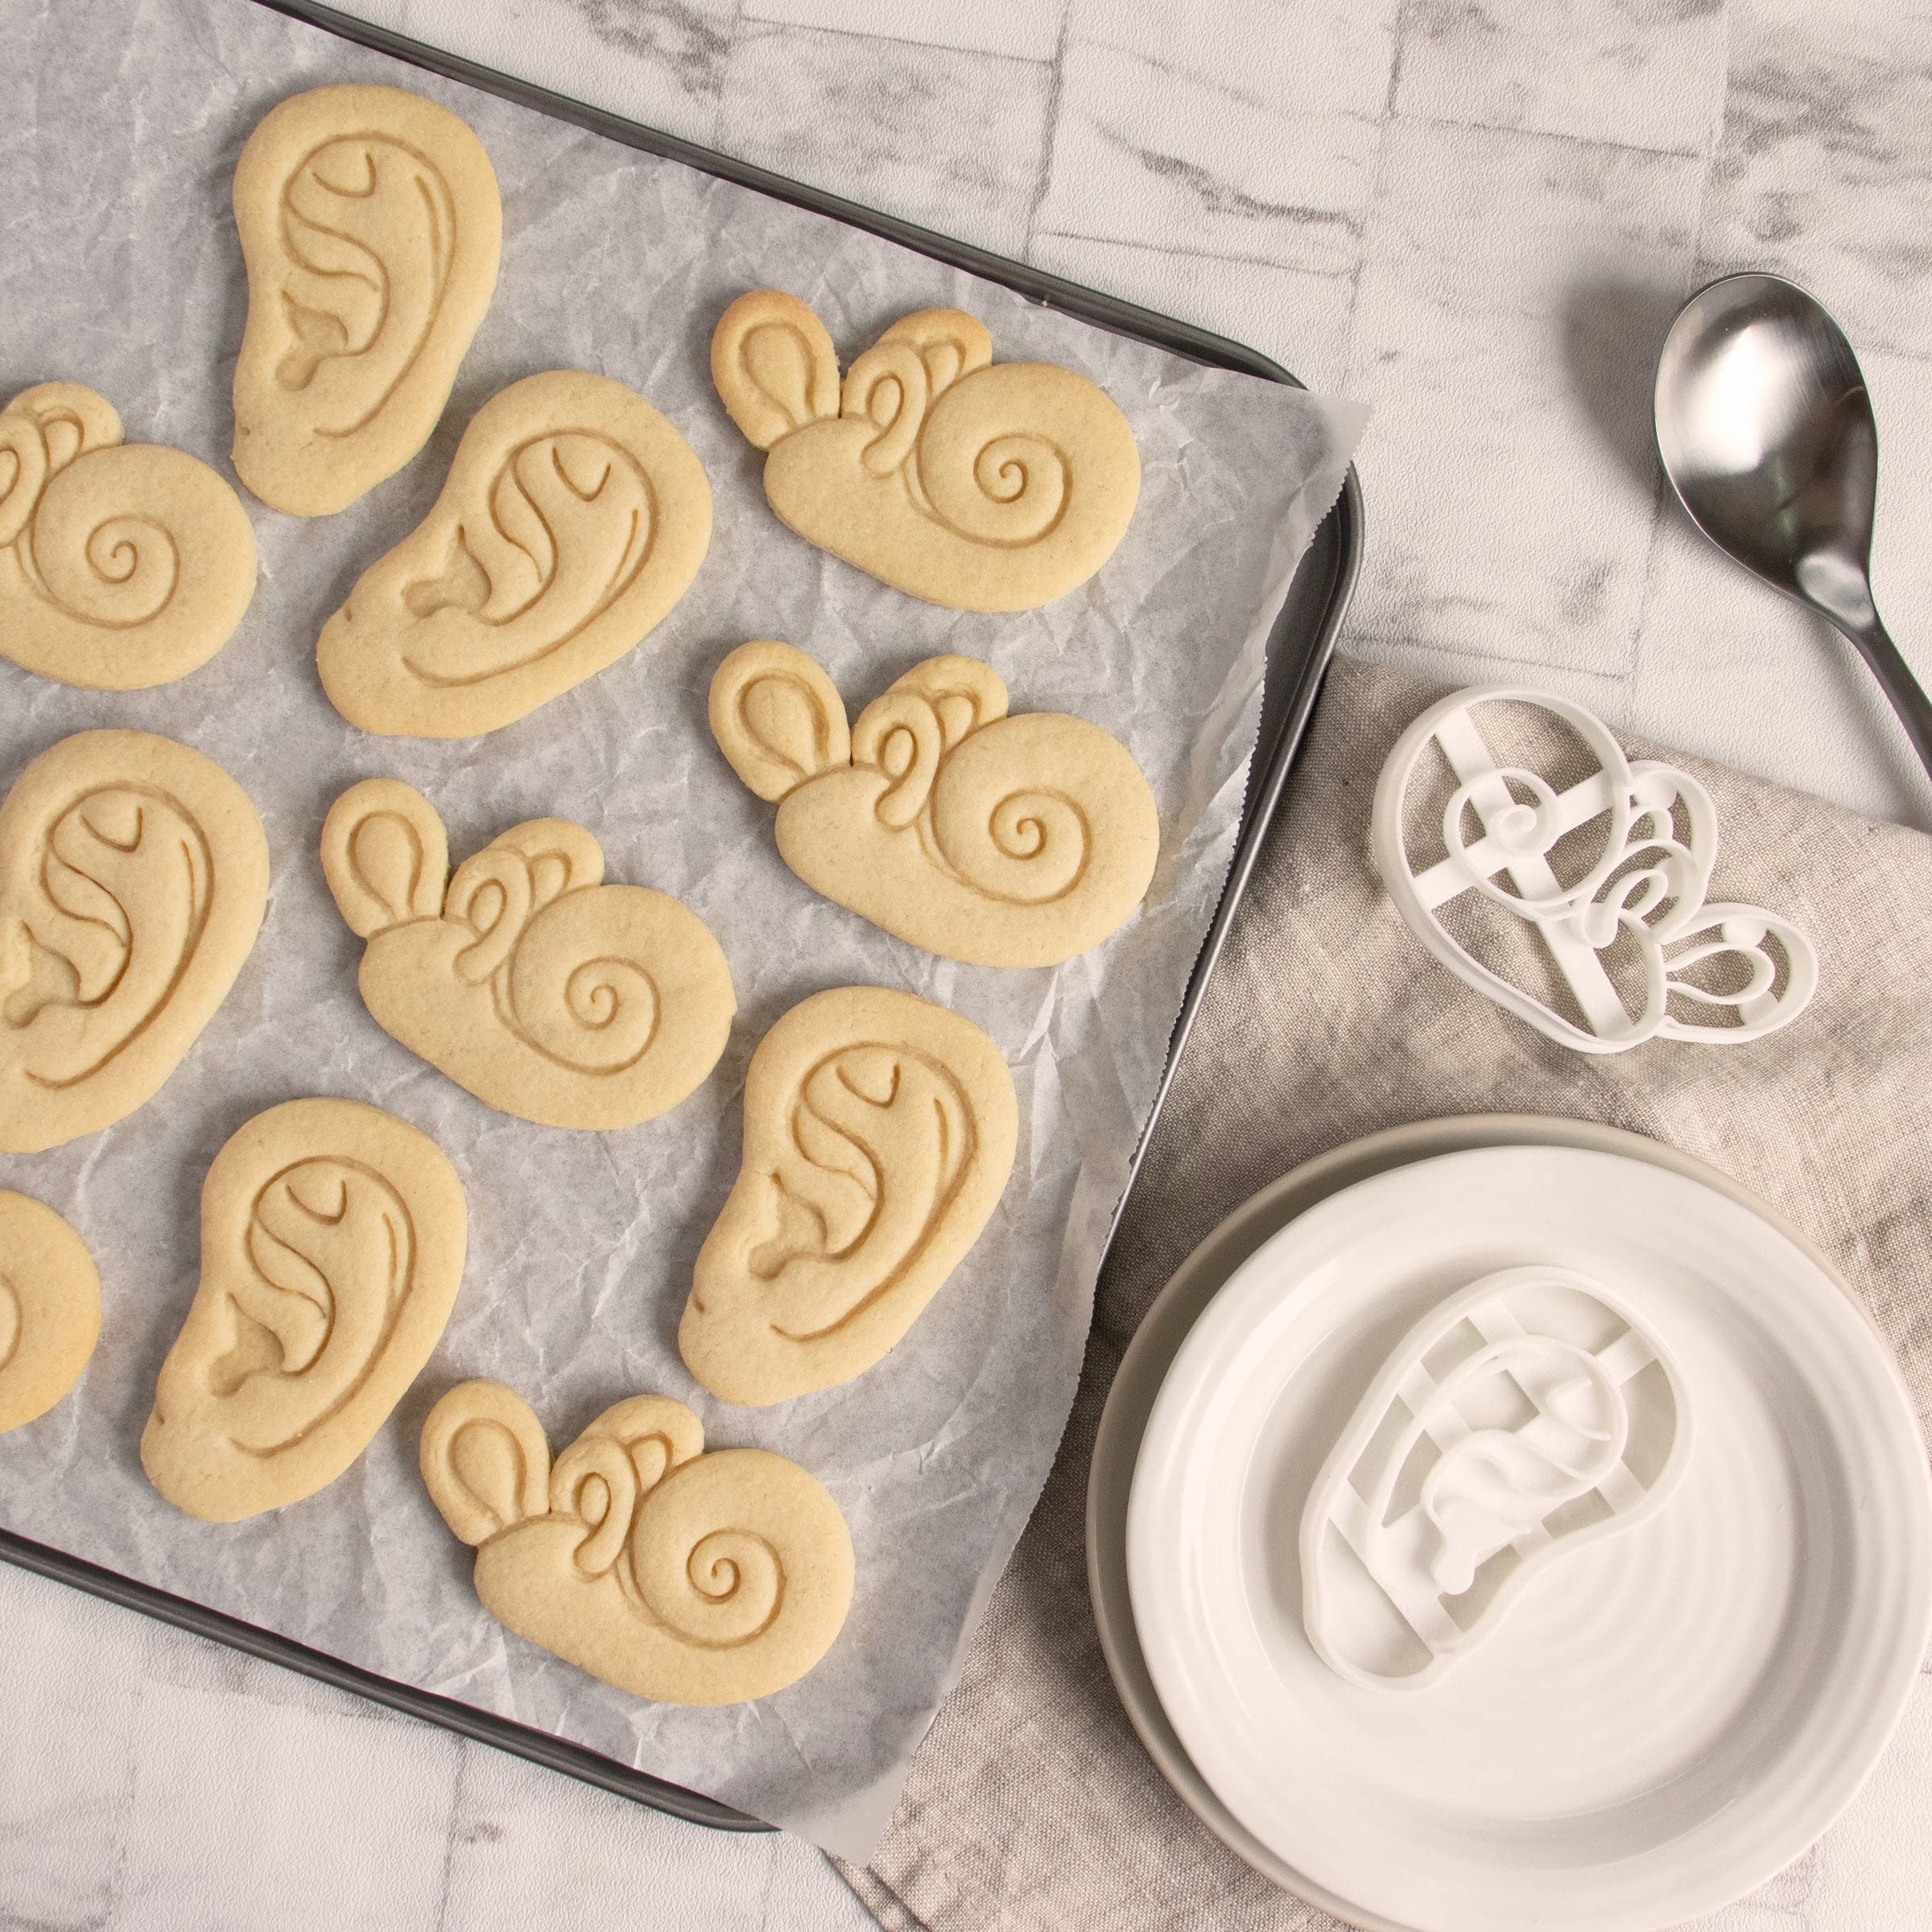 Set of 2 Ear cookie cutters (Designs: Anatomical Human Ear and Cochlea Inner Ear), 2 pieces - Bakerlogy